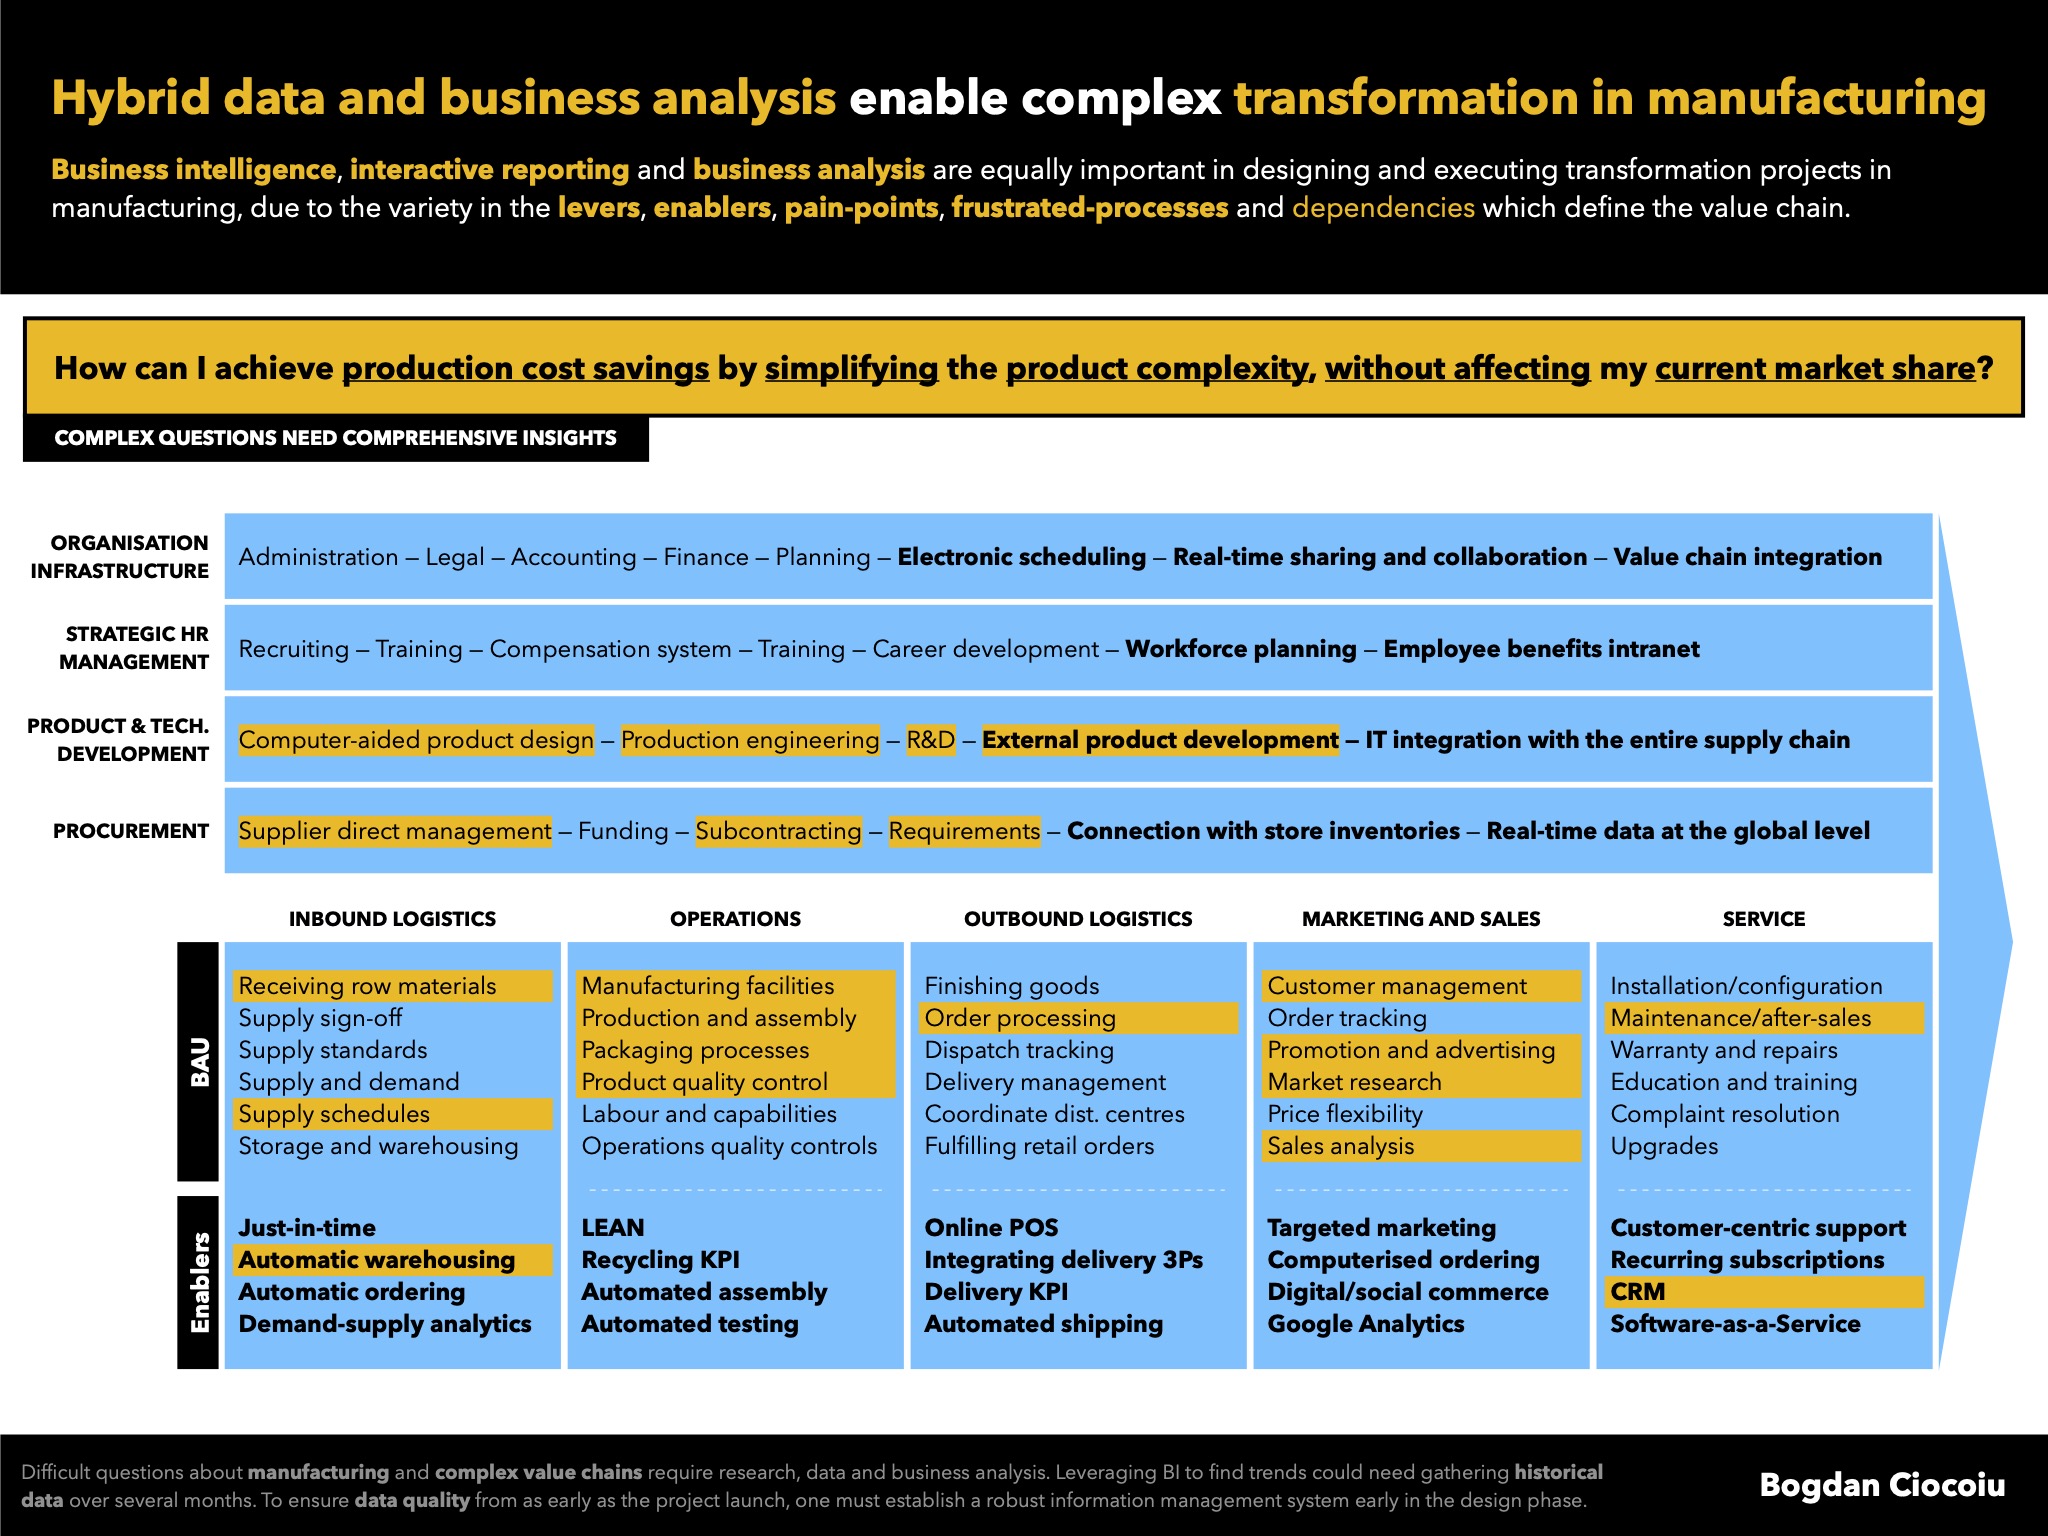 Hybrid data and business analysis enable transformation in the manufacturing sector